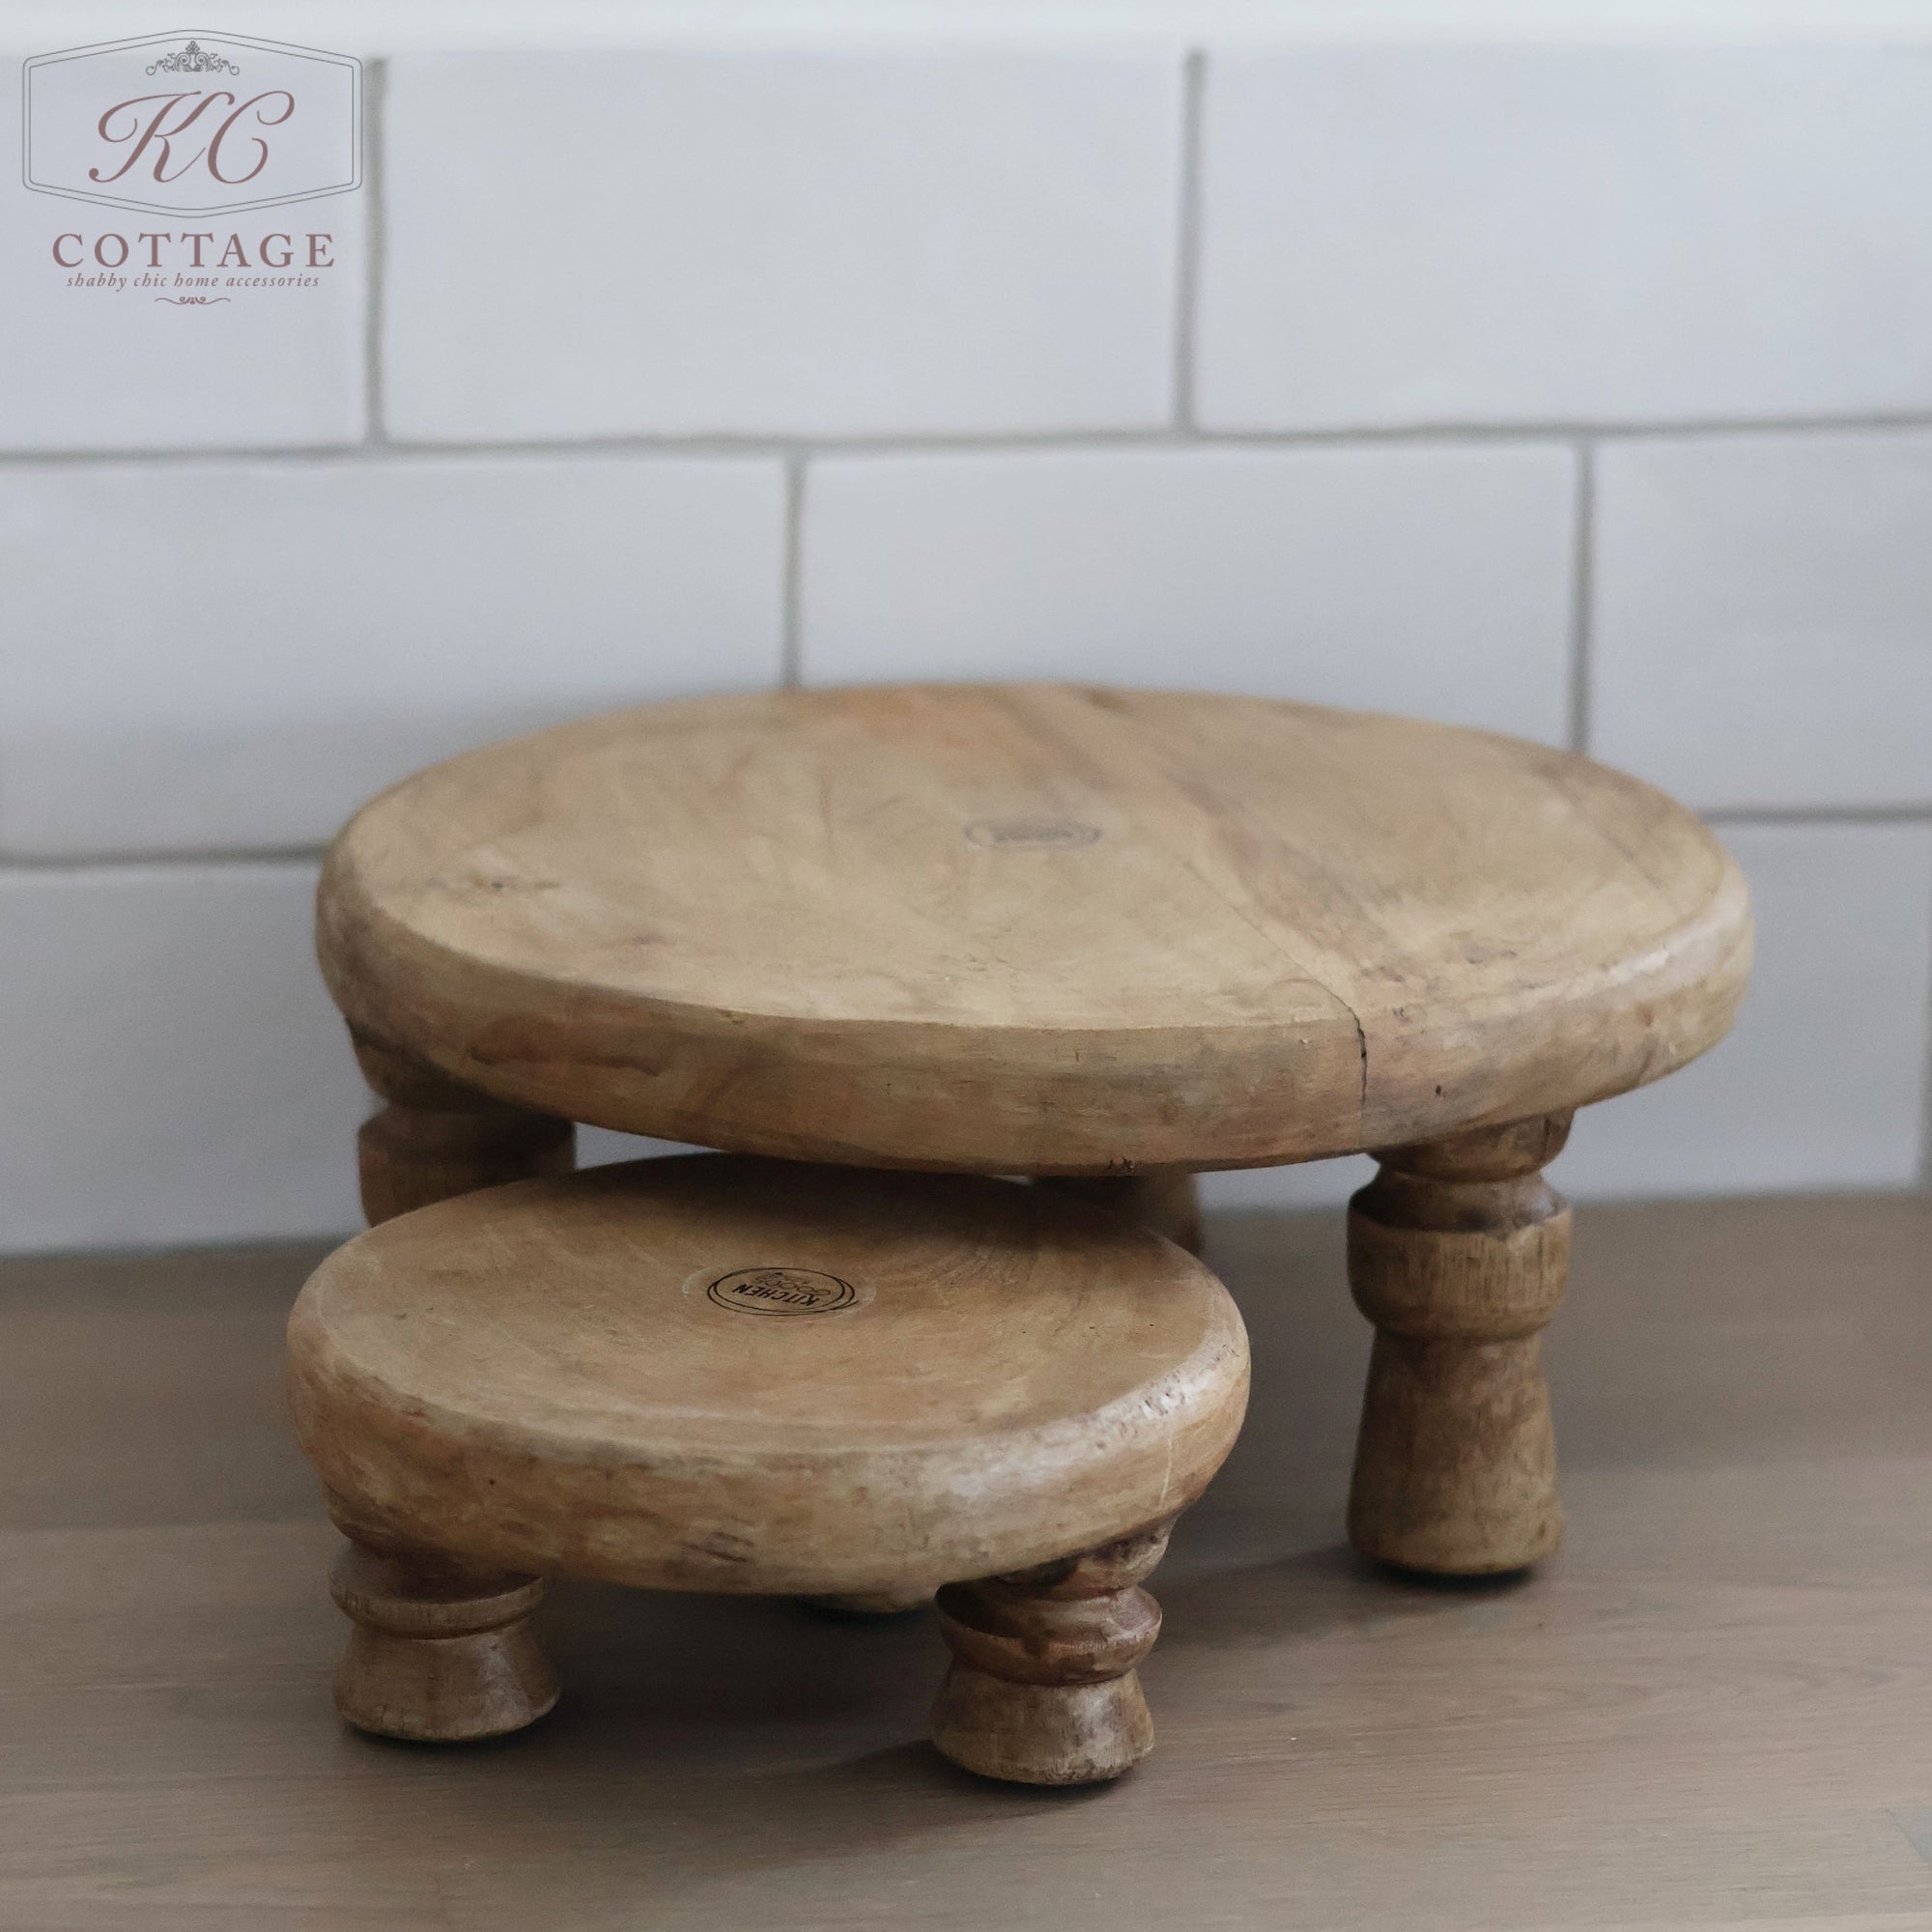 Two Raised Mango Wood Plates (set of two) of varying heights are placed on a wooden surface against a white tiled wall. Both plates have round surfaces and three legs each. The smaller plate is positioned slightly in front of and beneath the larger one, adding a charming touch to your home decor.